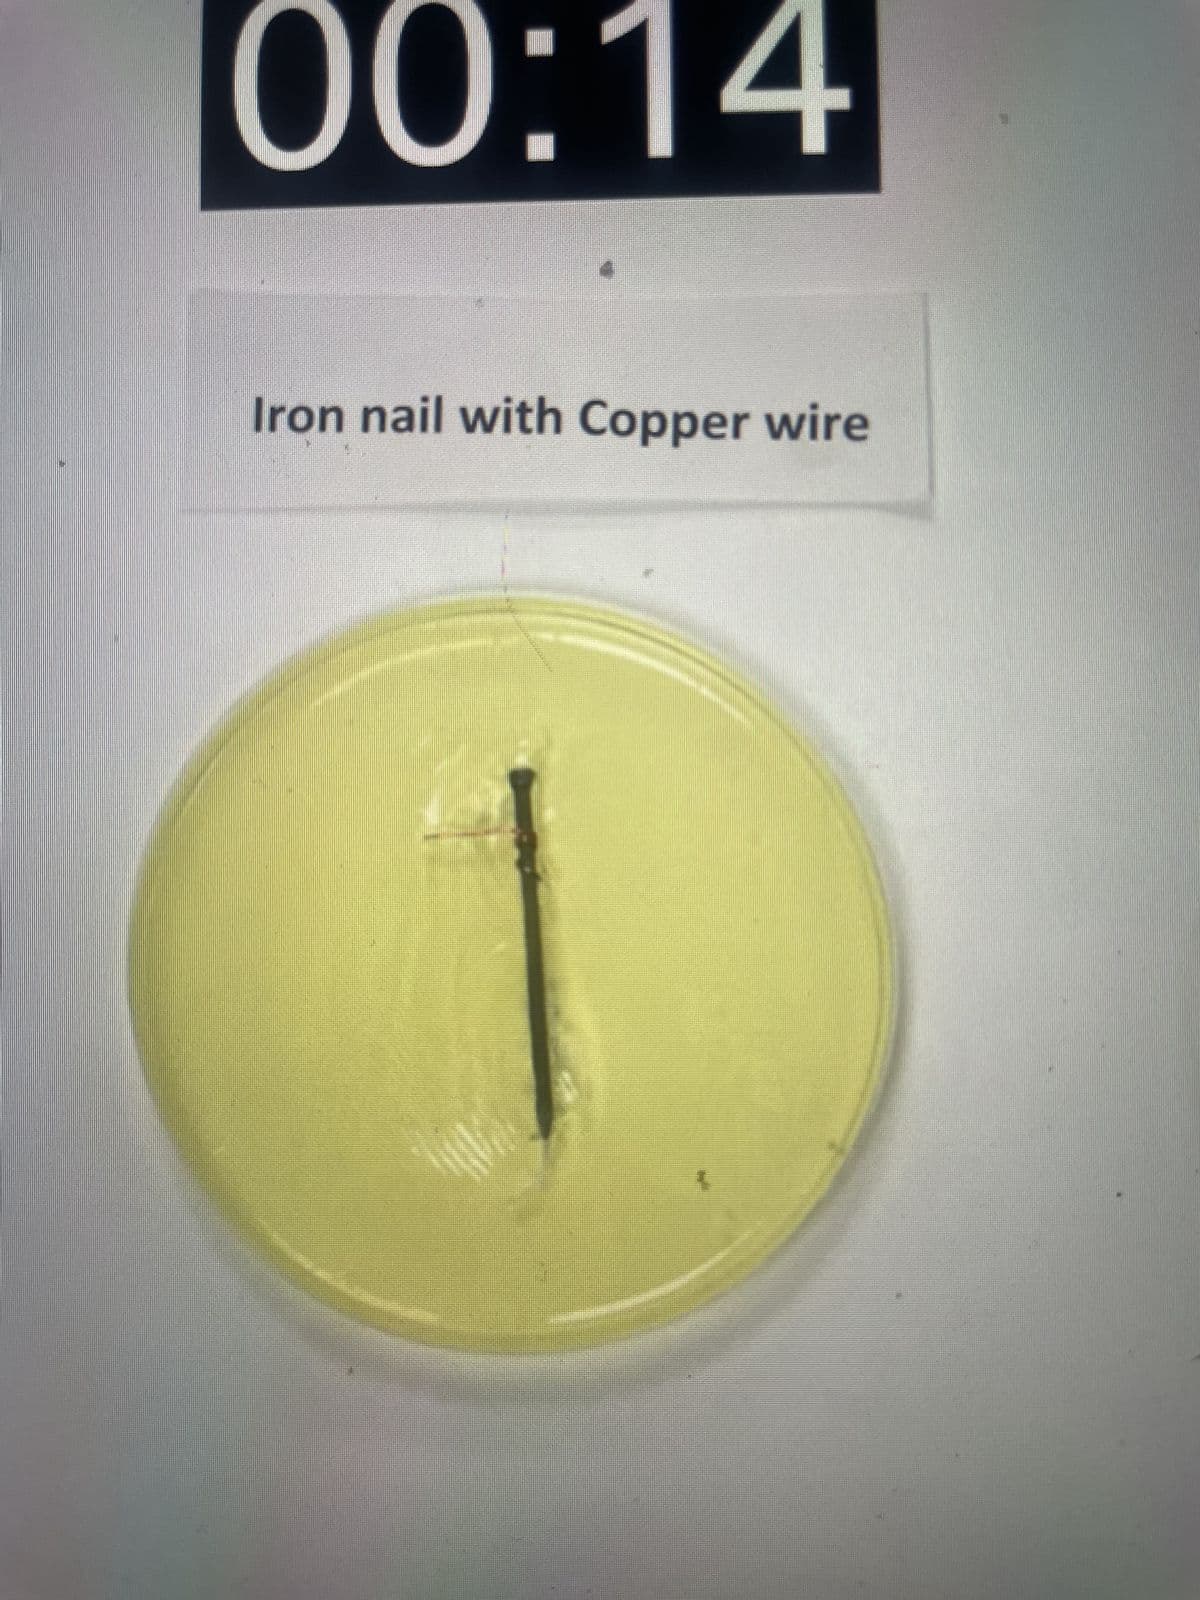 00:14
Iron nail with Copper wire